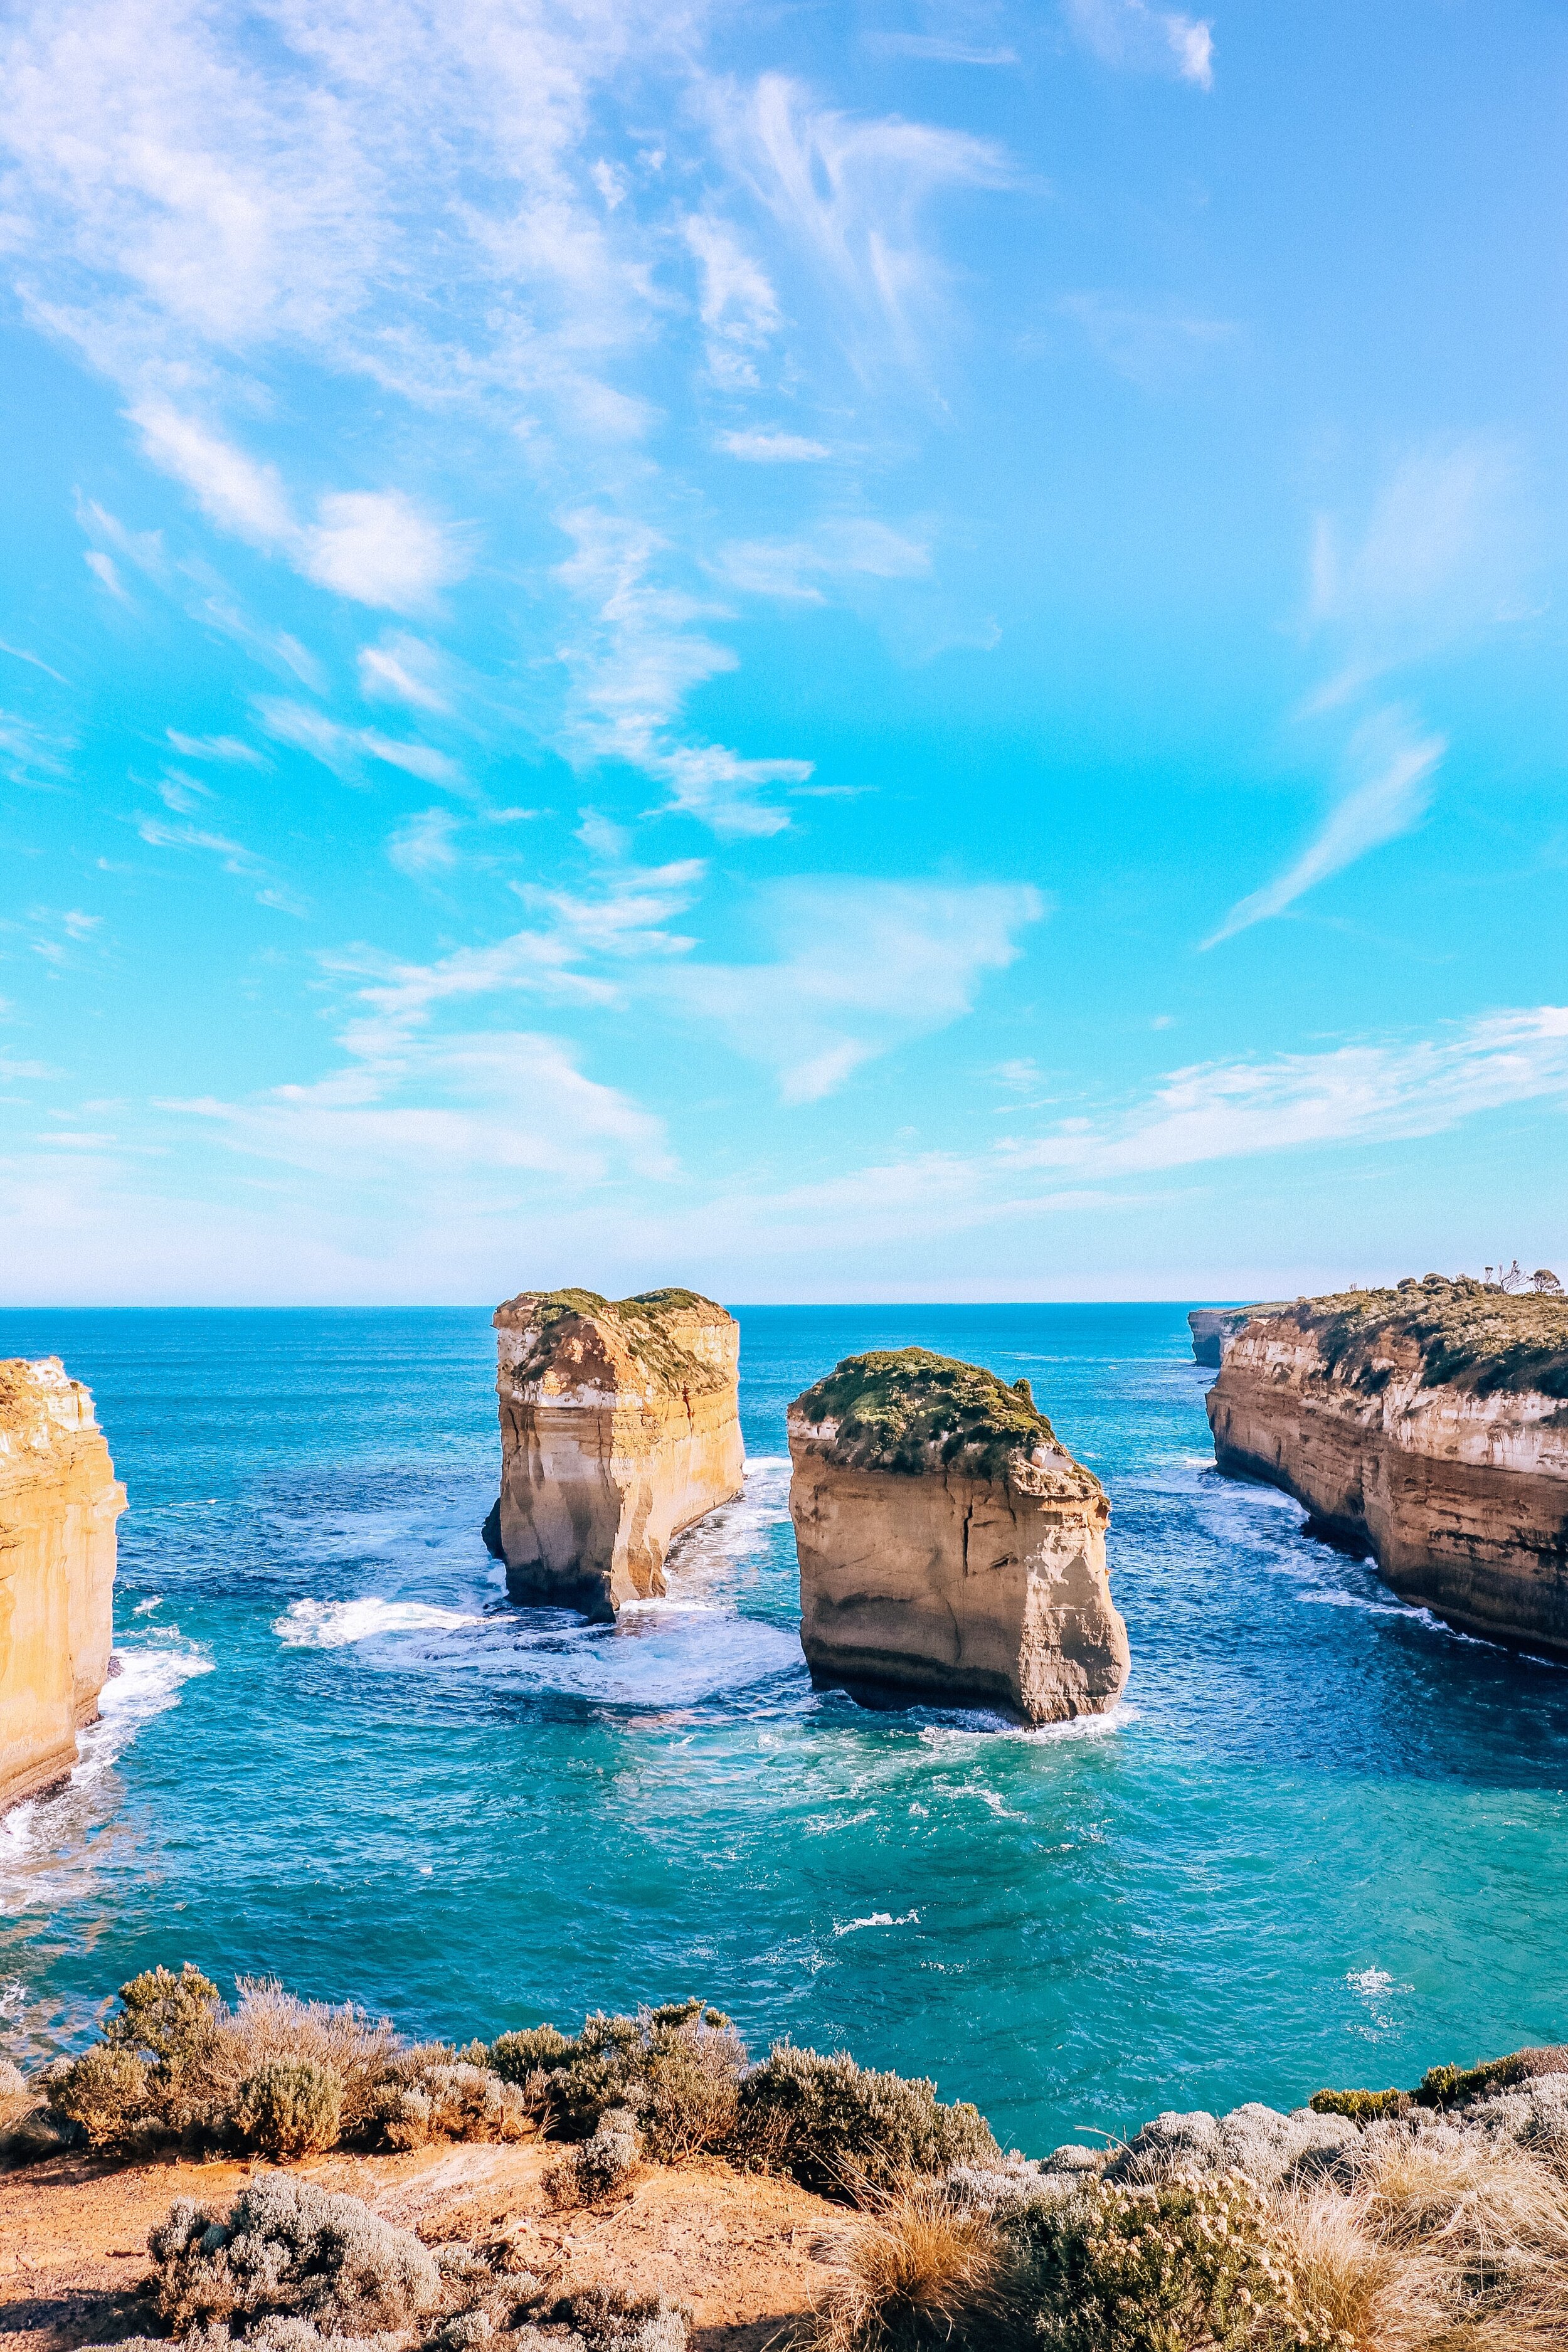 Most people know the famous Great Ocean Road and the 12 Apostles, but there are many other lesser known stops along the Great Ocean Road which are worth visiting. Tom and Eva Lookout is one of these underrated stops on the Great Ocean Road and this …